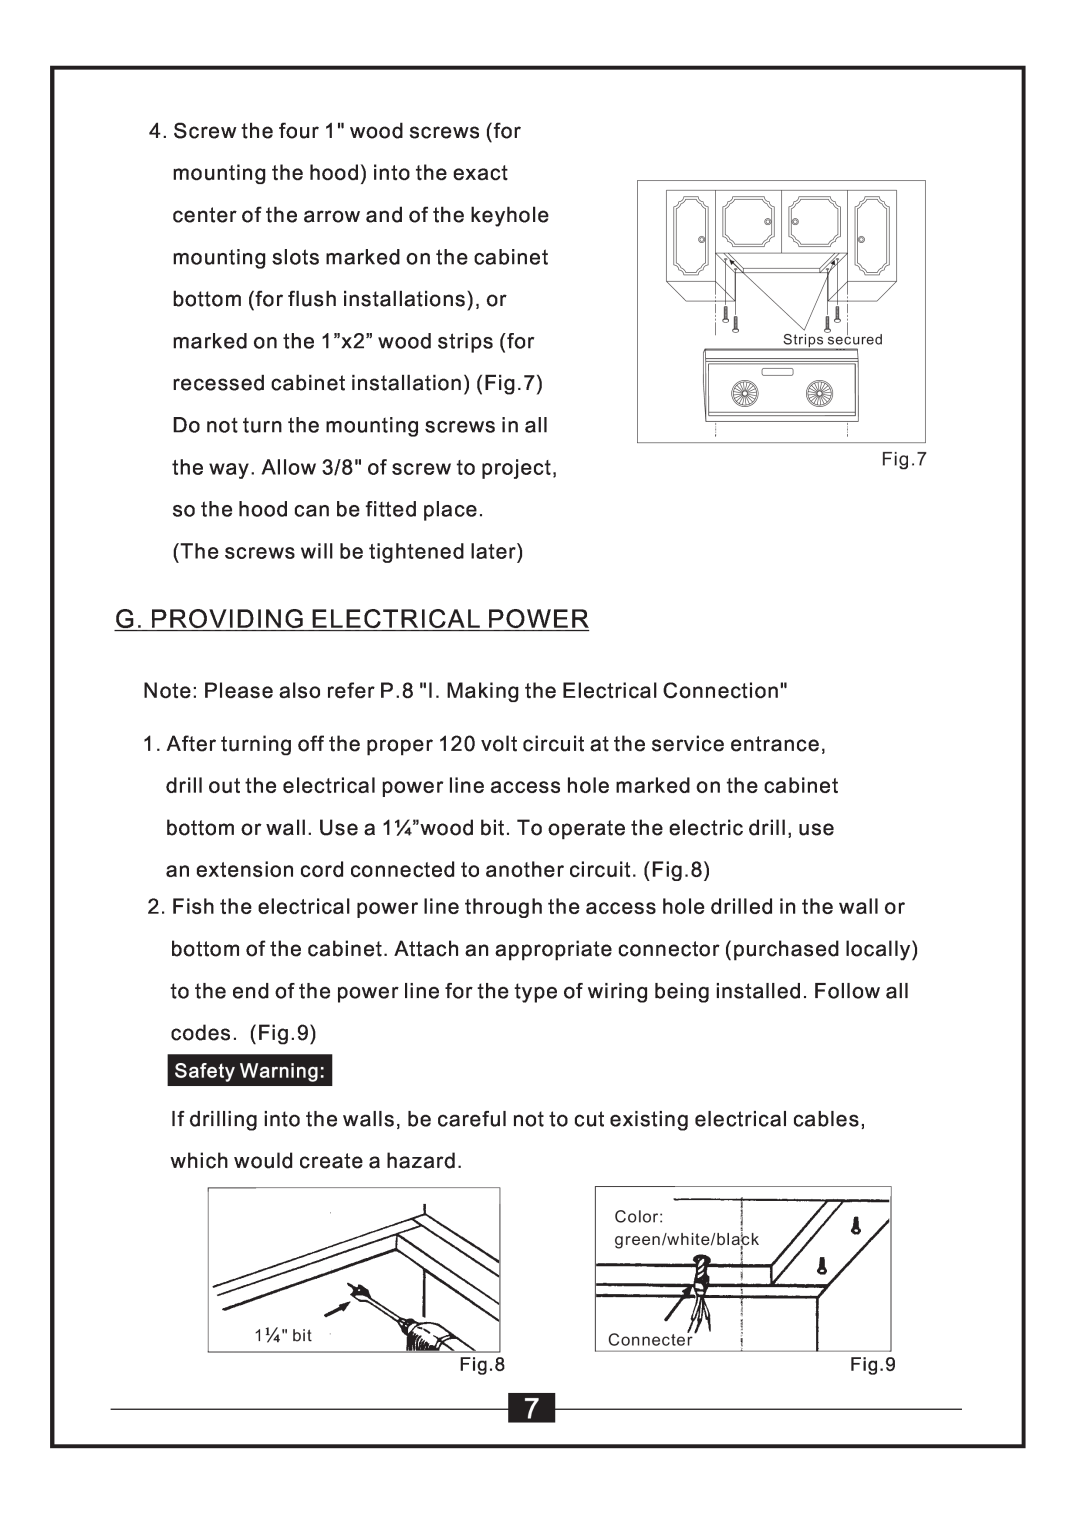 Windster WS-55 SERIES manual G.Providingelectricalpower, G.ProvidingElectricalPower 